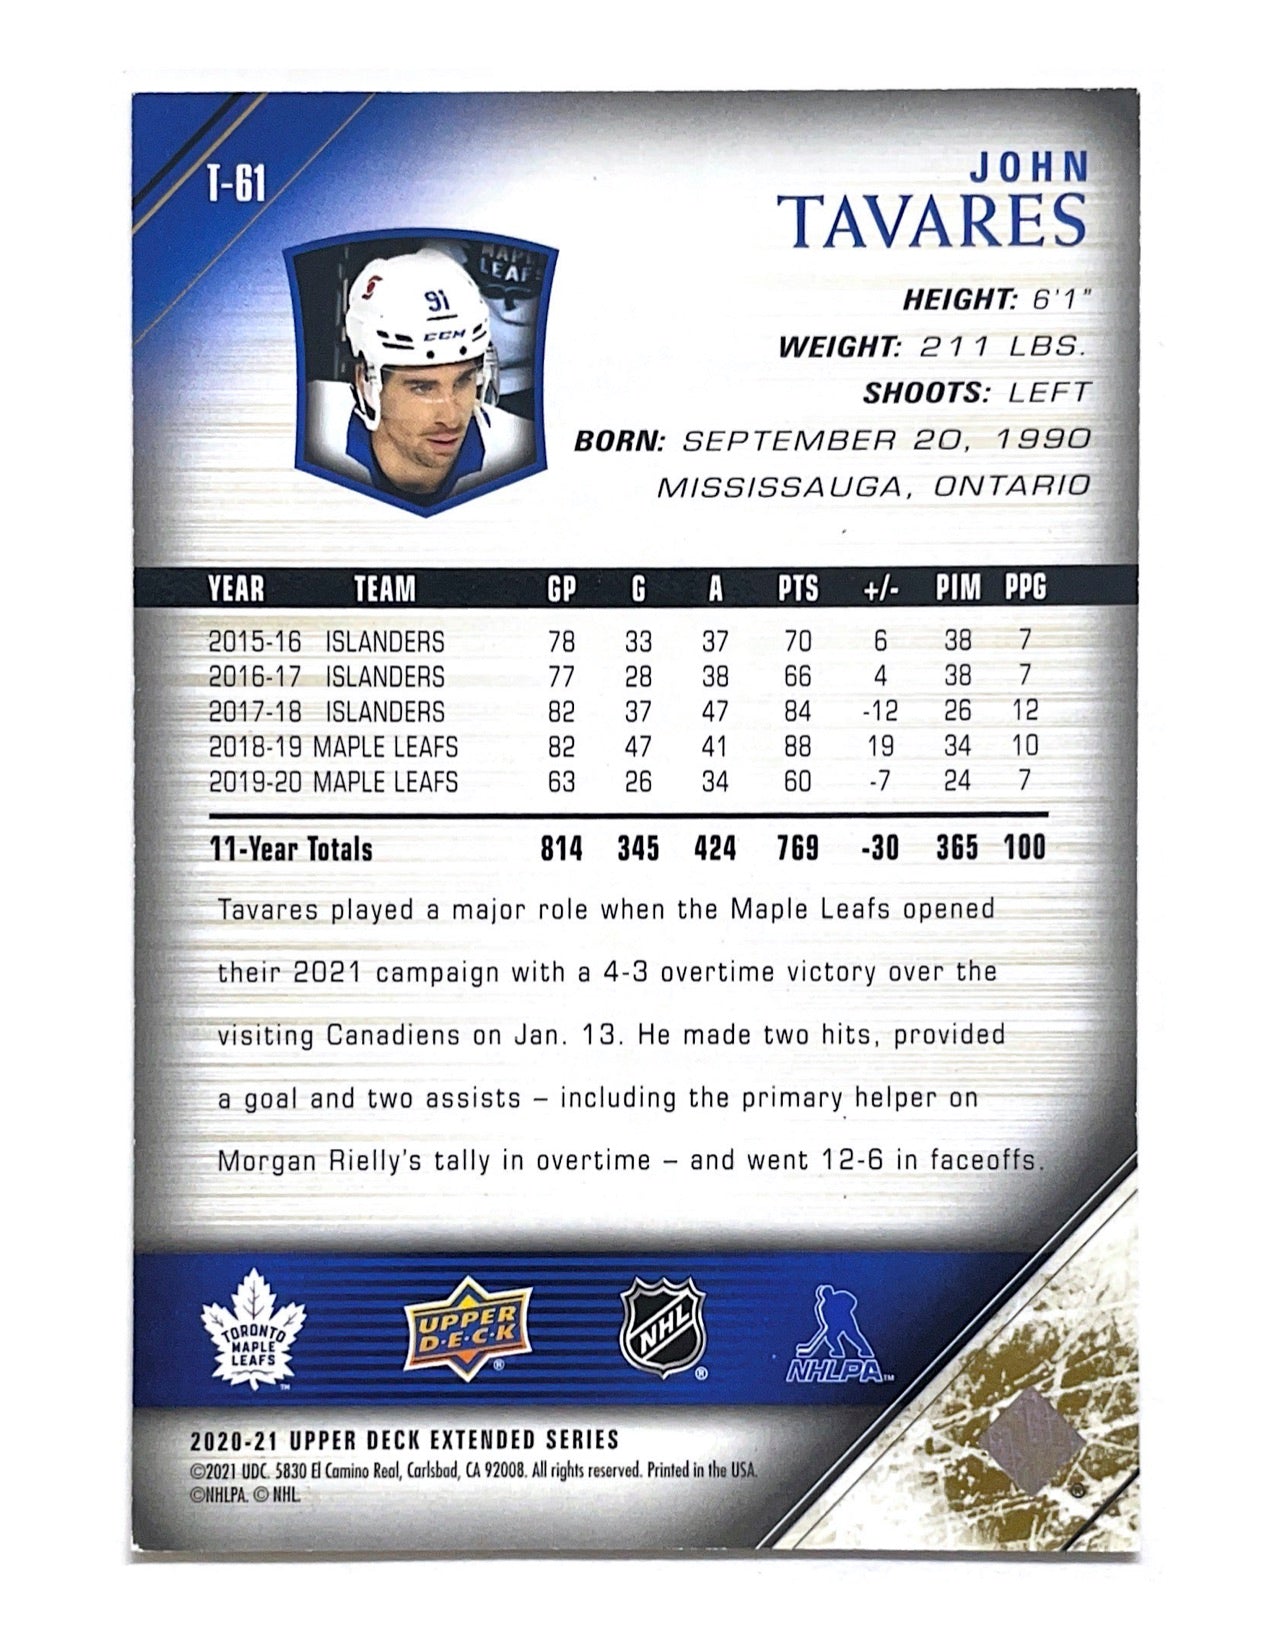 John Tavares 2020-21 Upper Deck Extended Series Tribute UD Exclusives #T-61 - 011/100